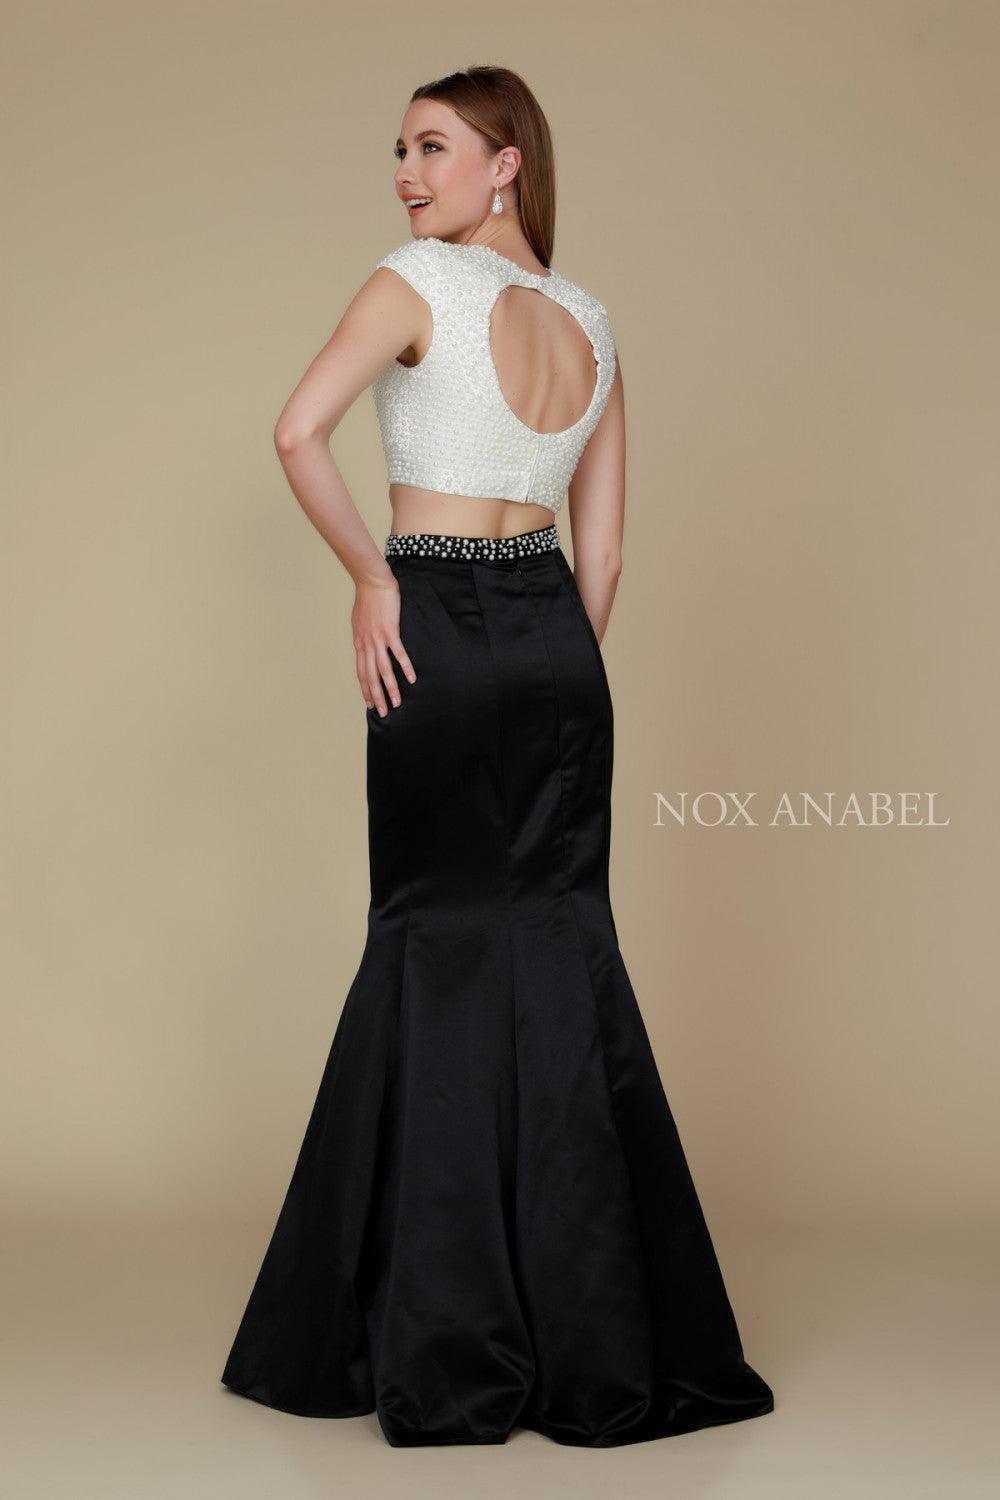 Long Two Piece Formal Prom Dress - The Dress Outlet Nox Anabel